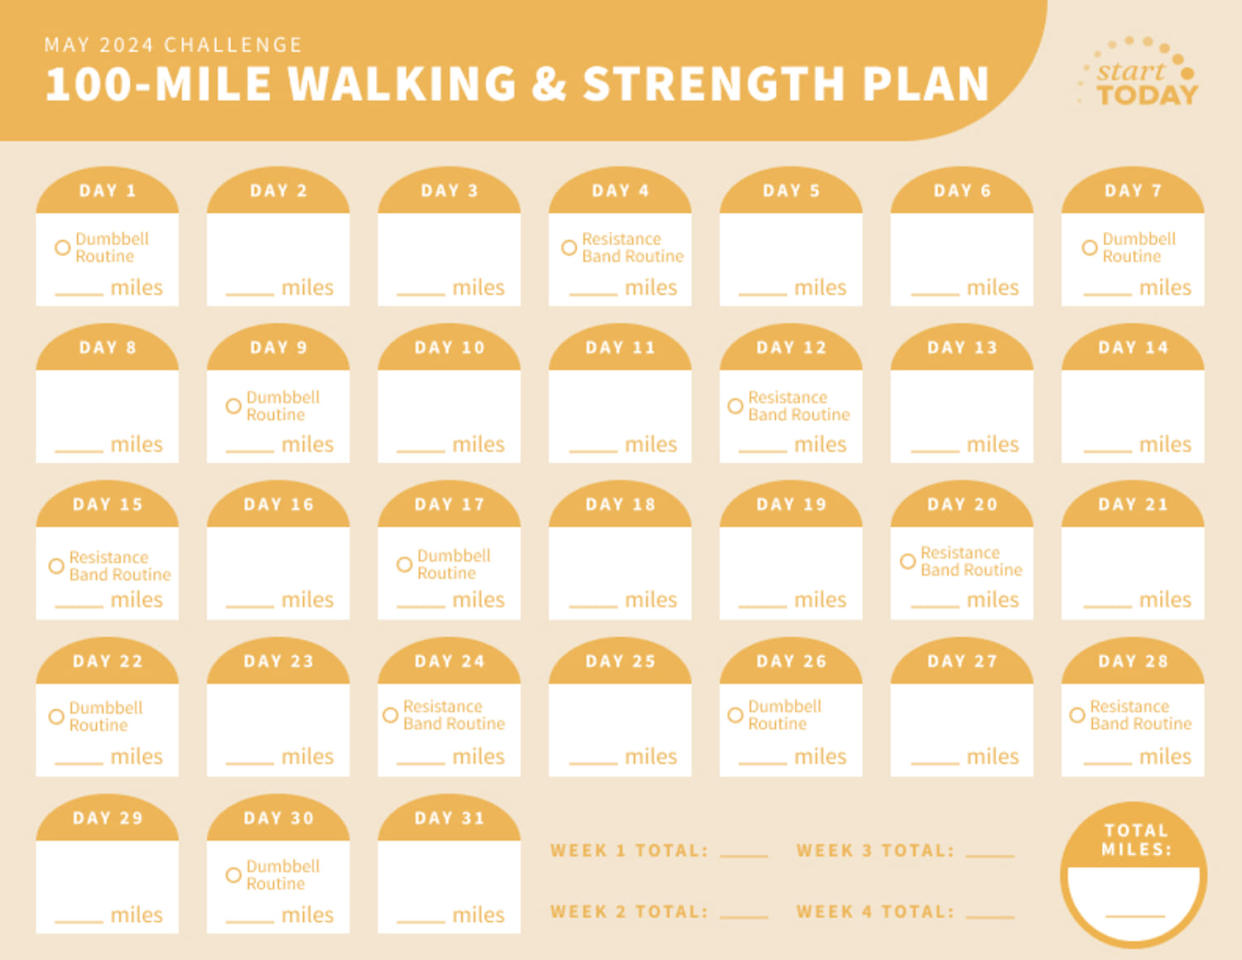 Start TODAY May 100-Mile Walking and Strength Challenge